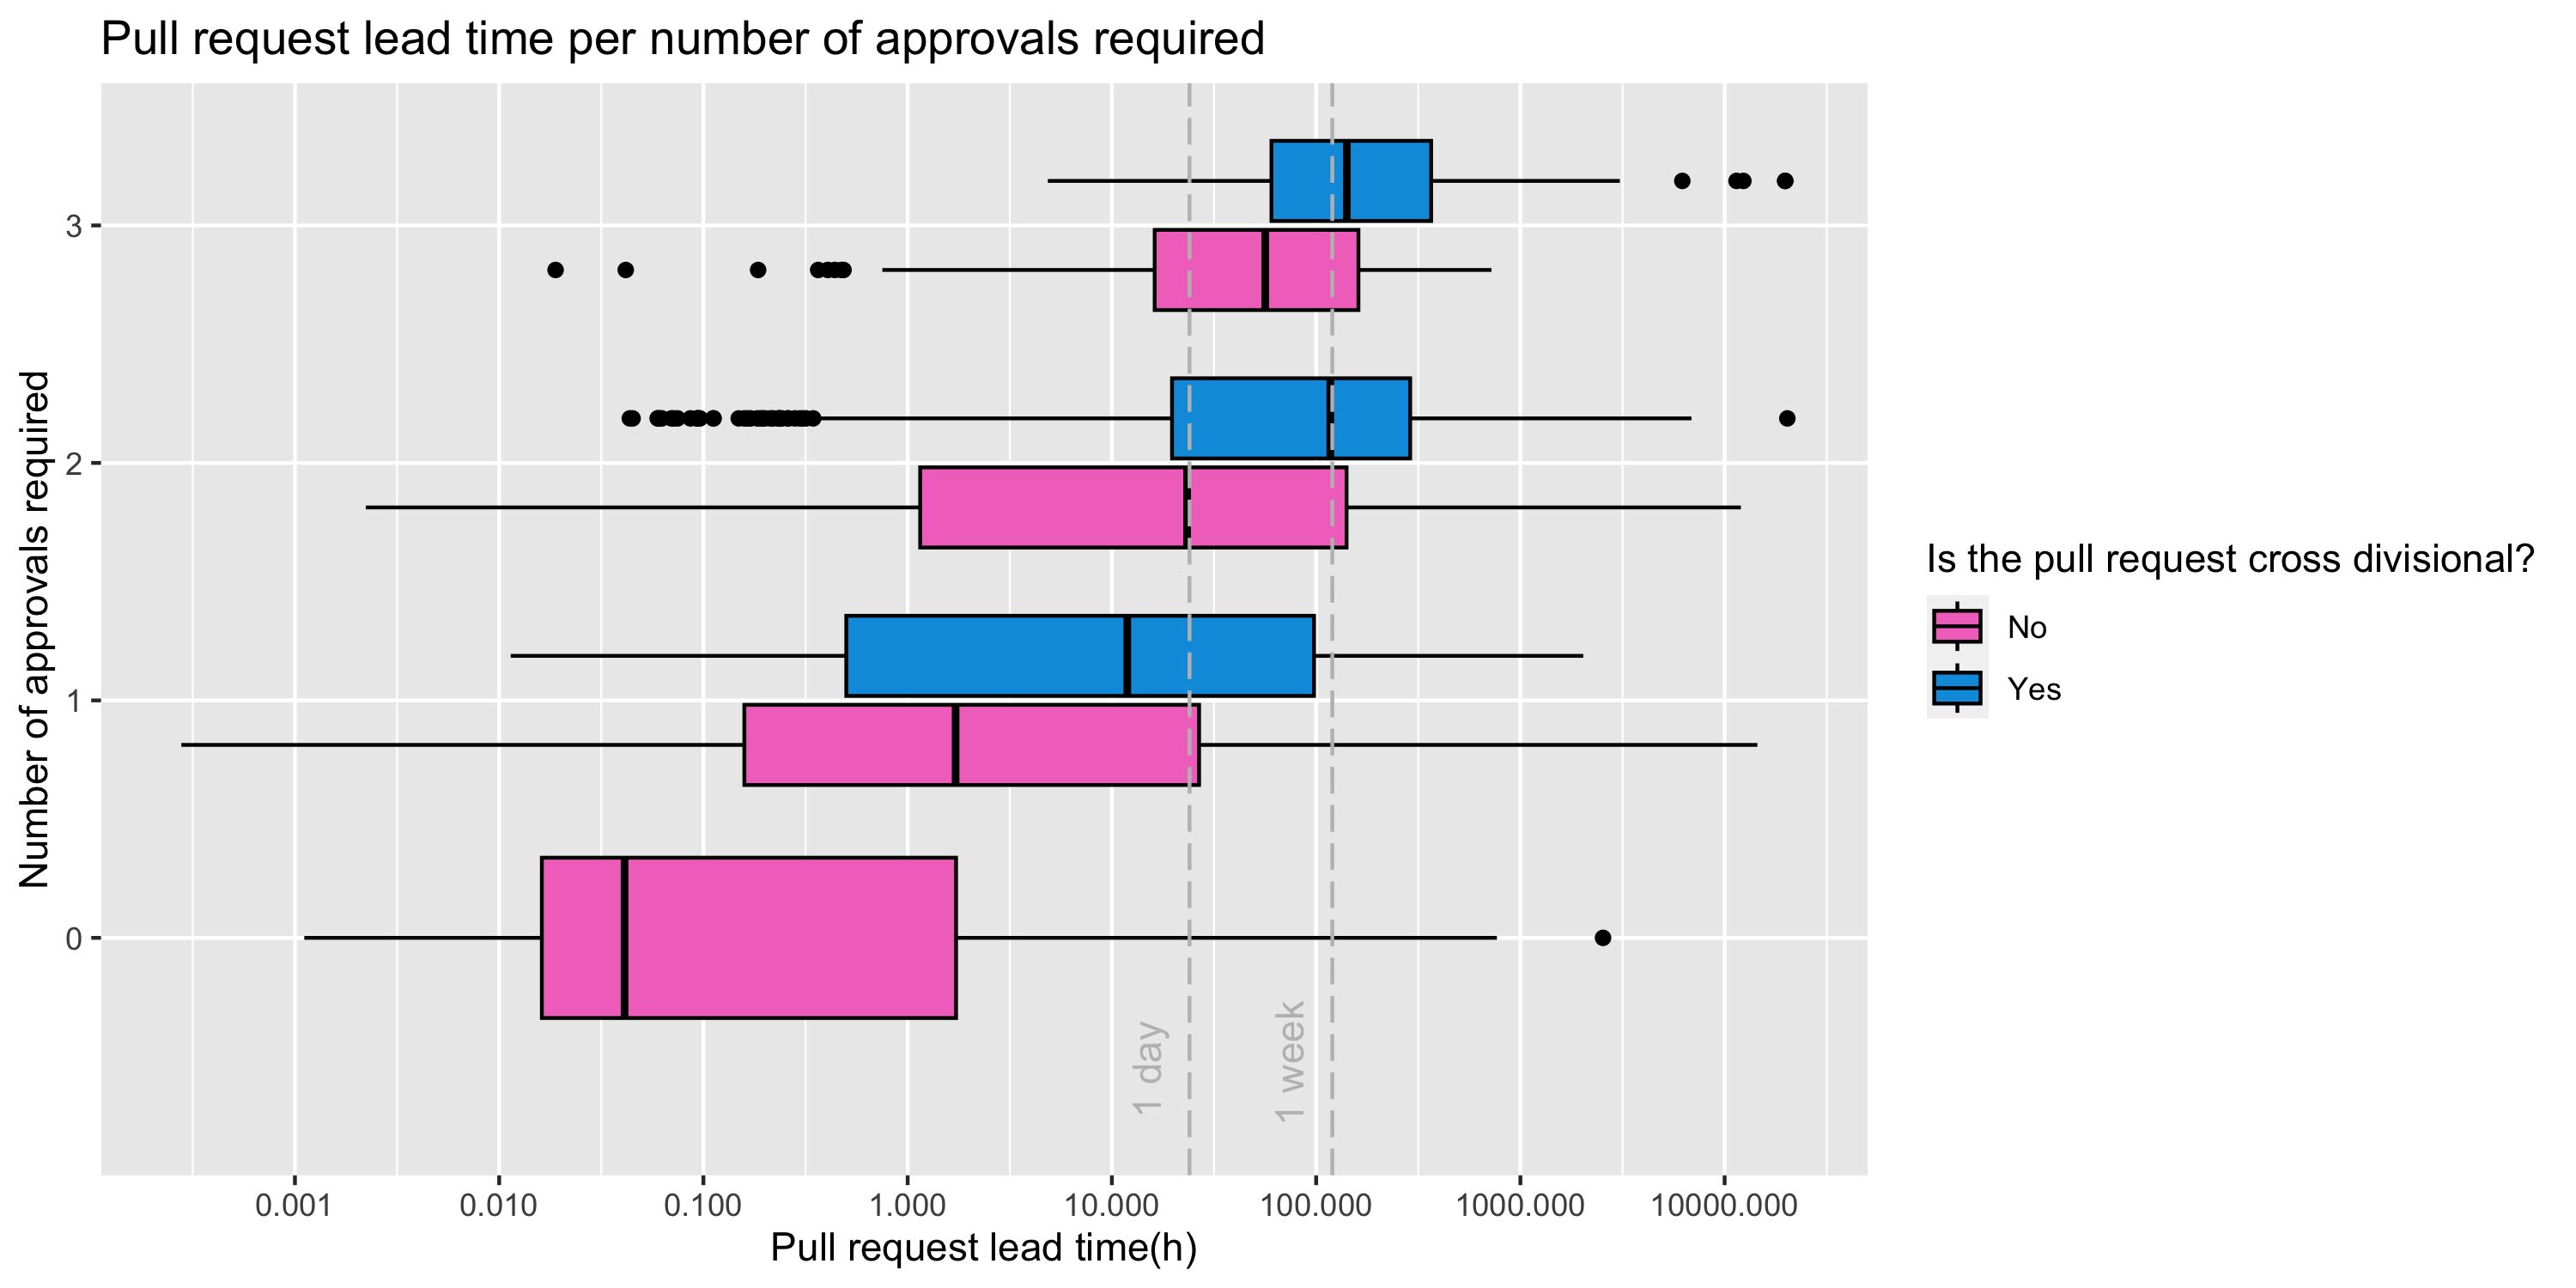 Lead time for per number of approvals required coloured by cross-divisional/divisional